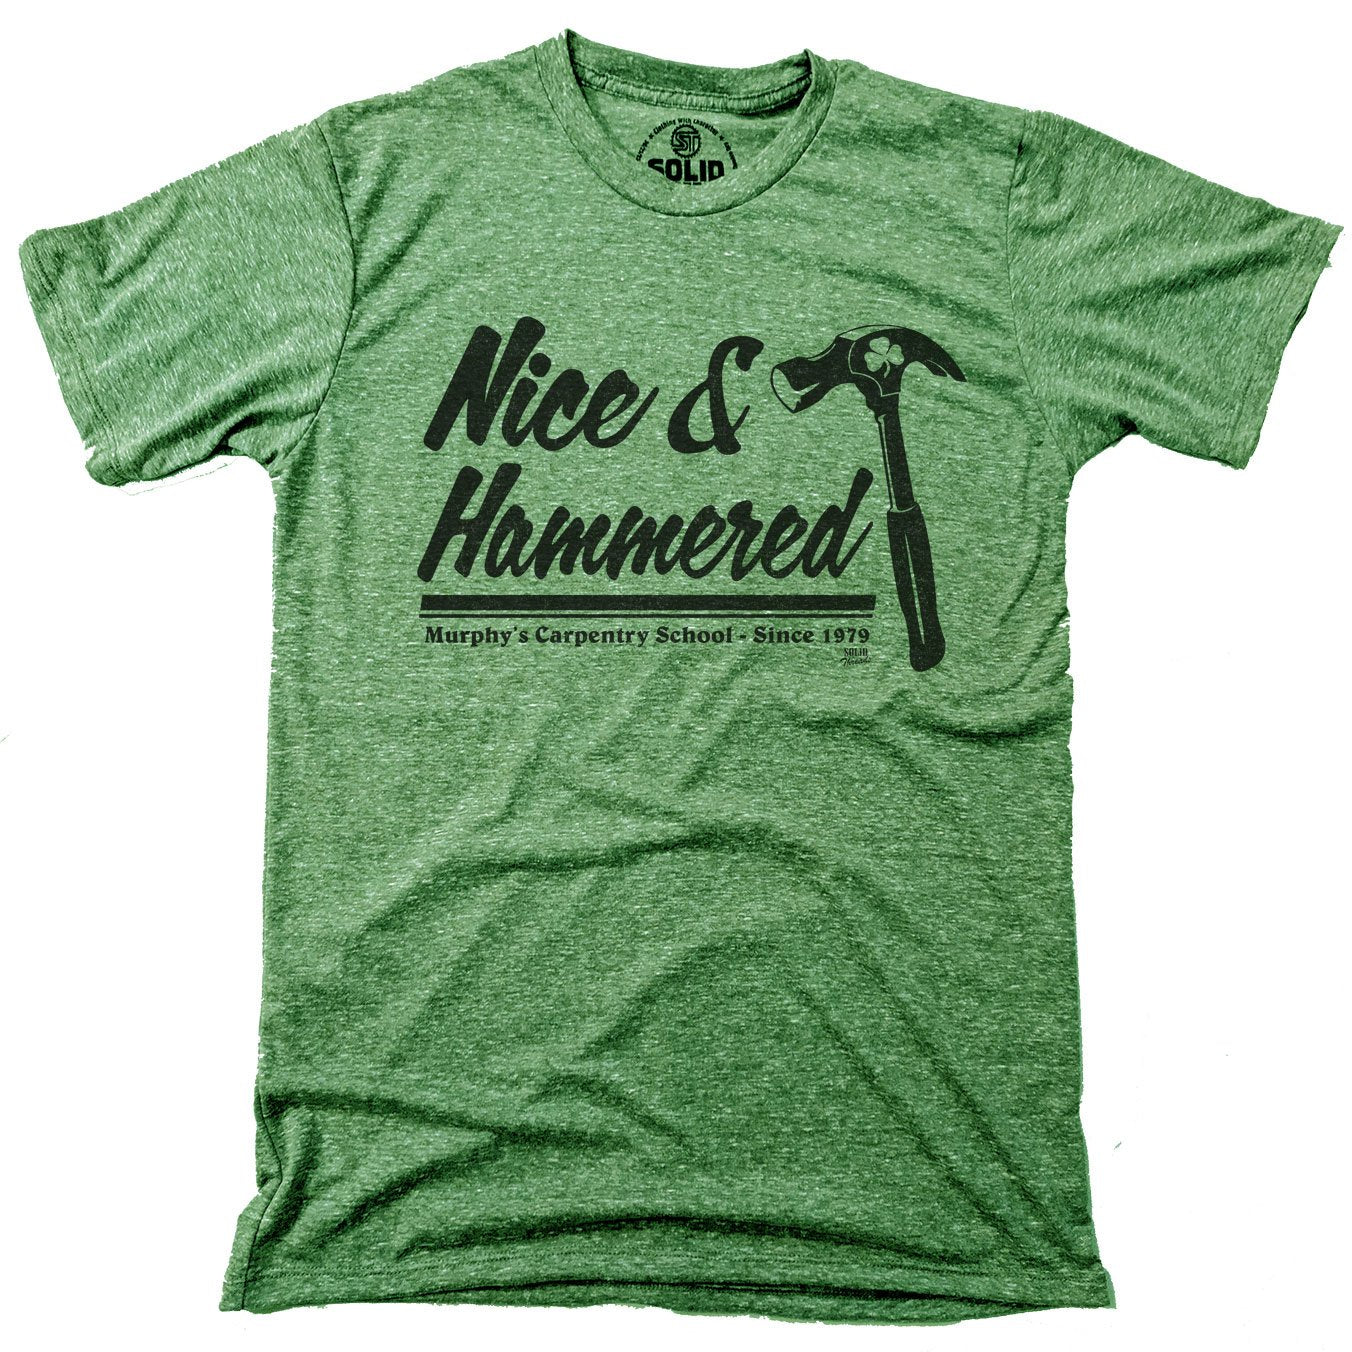 Nice & Hammered Vintage T-shirt | SOLID THREADS